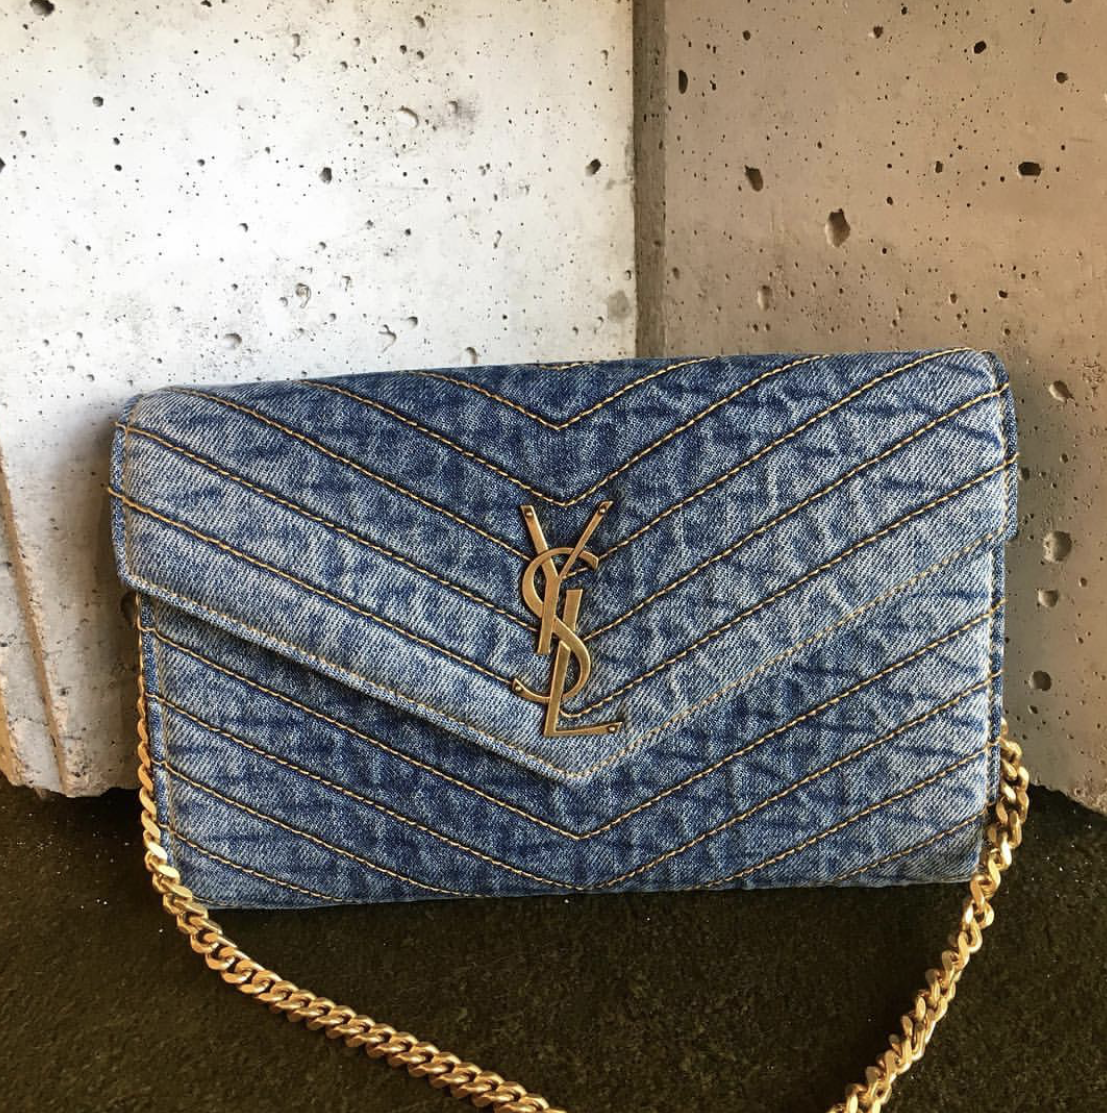 Bomb_Product_of_the_Day_Denim_Monogramme_Quilted_YSL_Shoulder_Bag